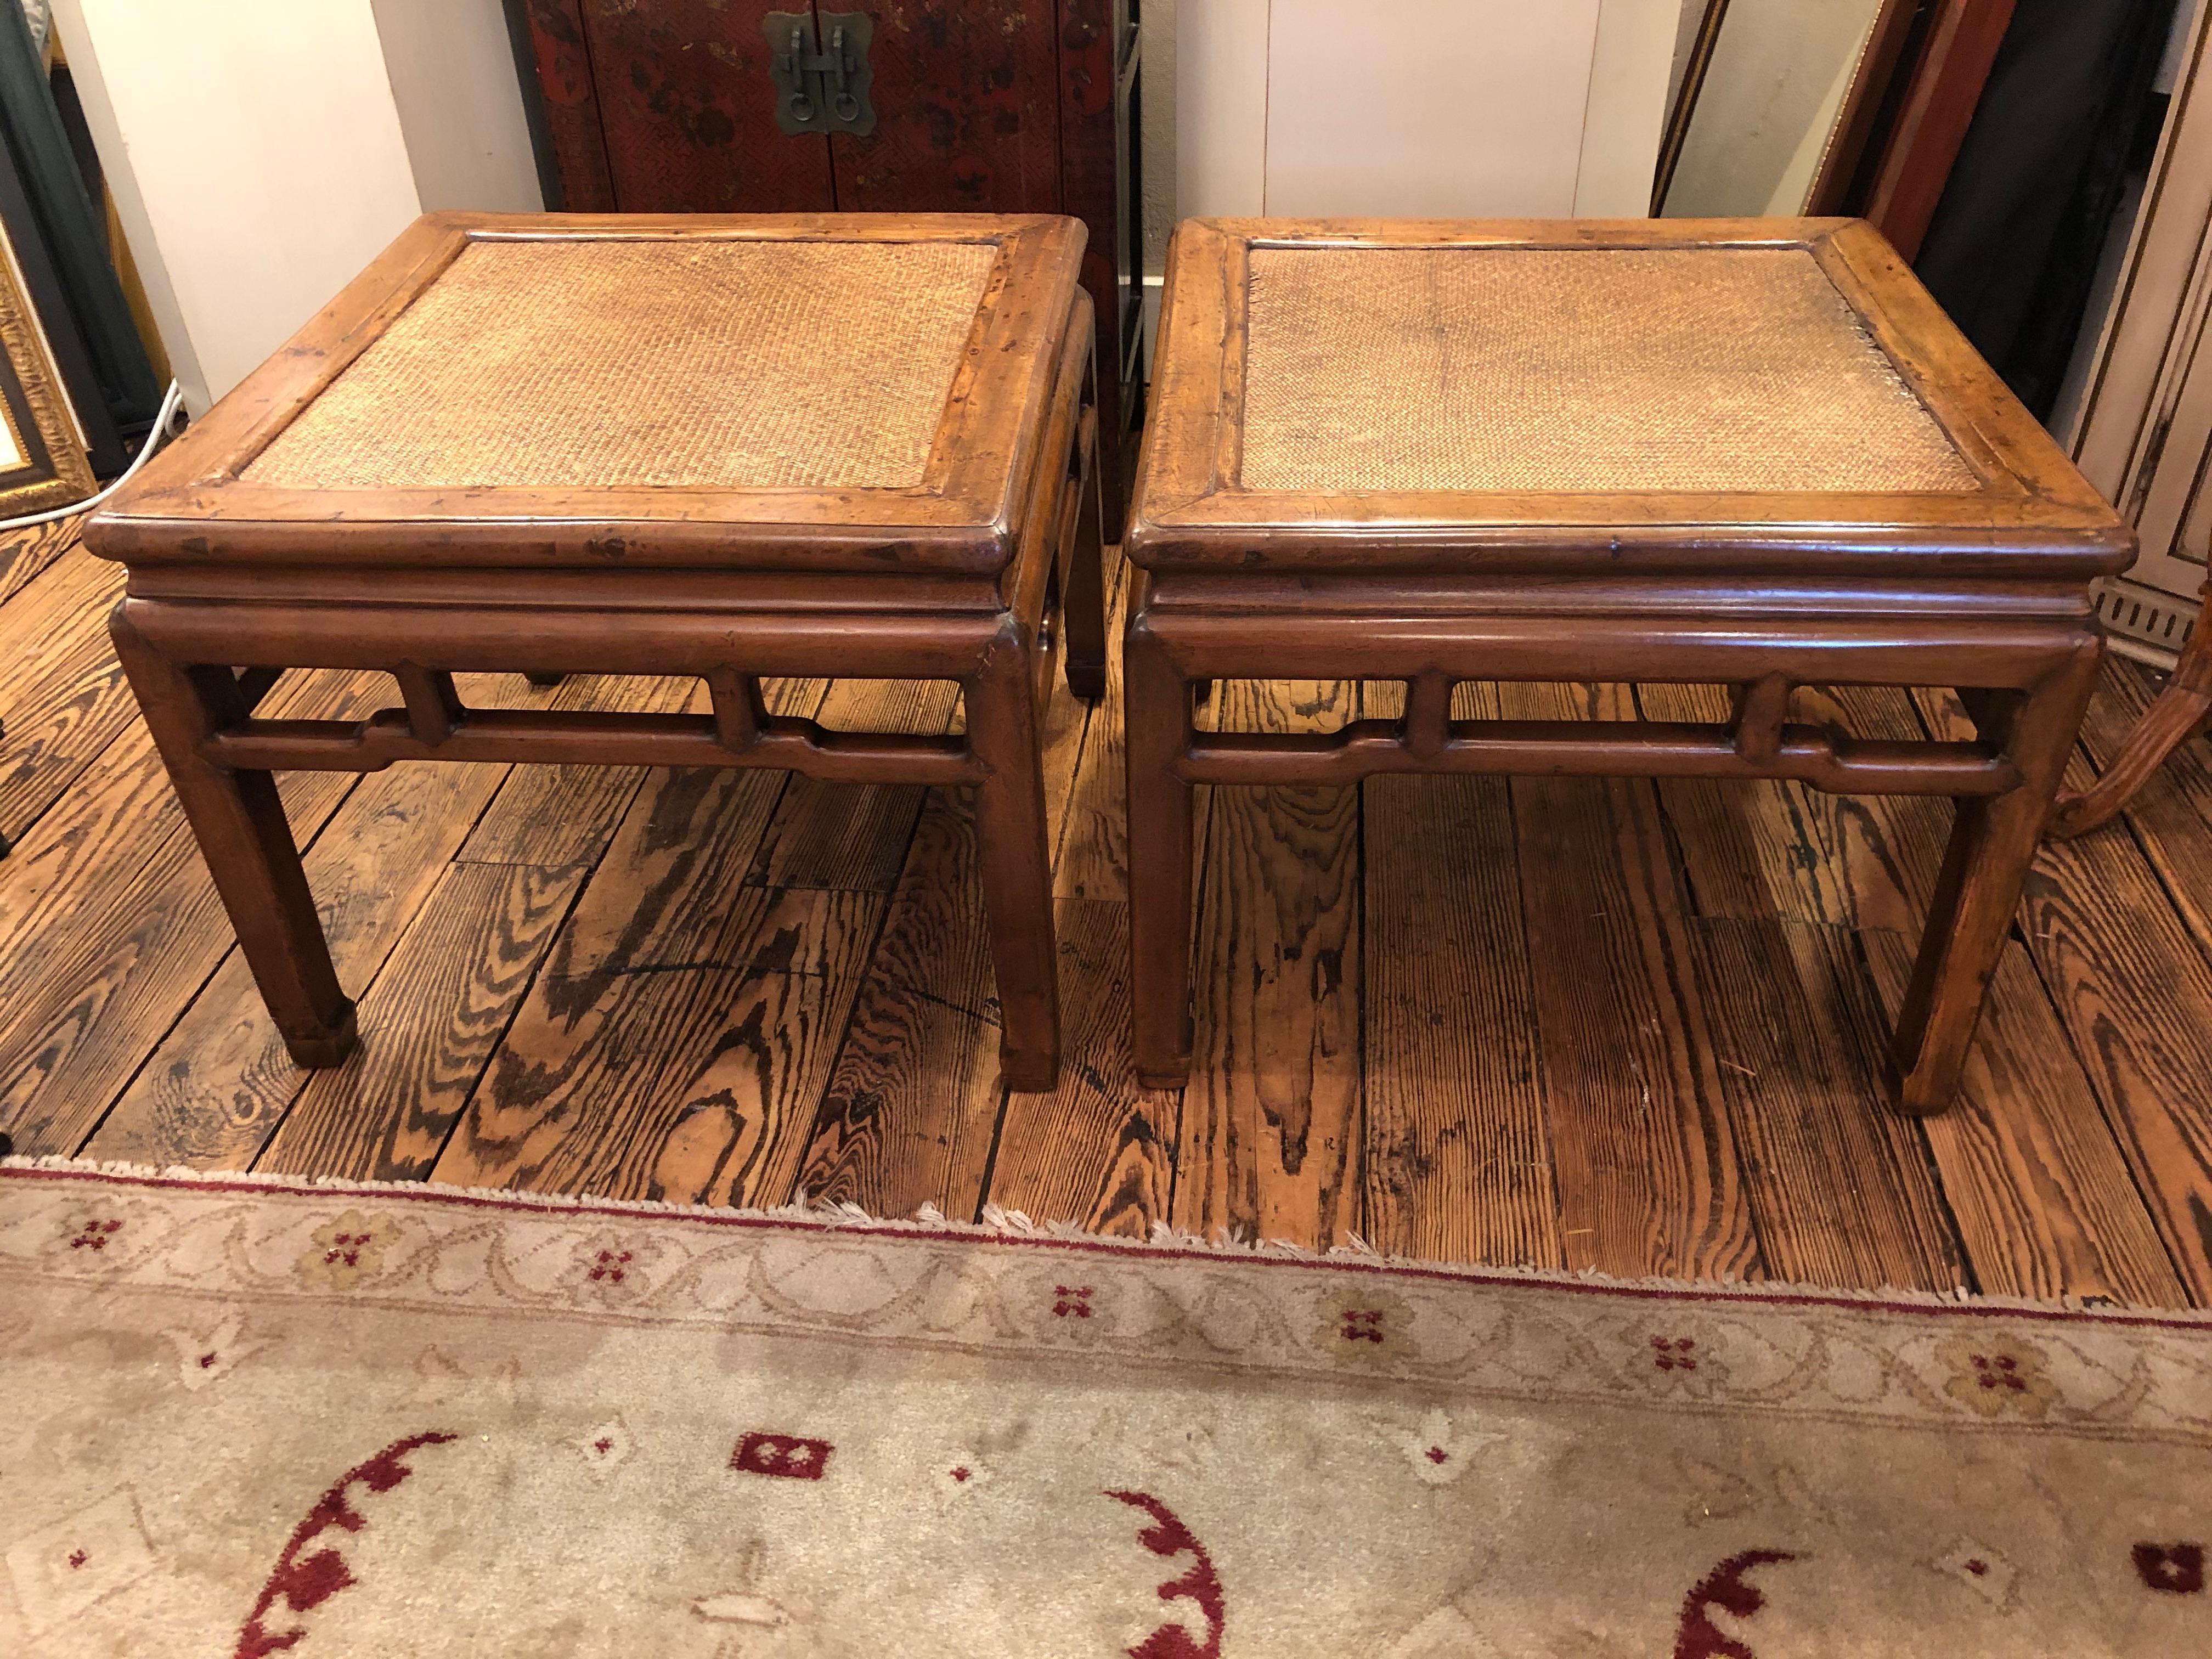 Handsome pair of 19th century honey colored elm square end tables using traditional mortise-and-tenon joinery techniques. The tables feature straight legs ending in hoofed feet and textural rattan tops. The clean lines of the frames are contrasted